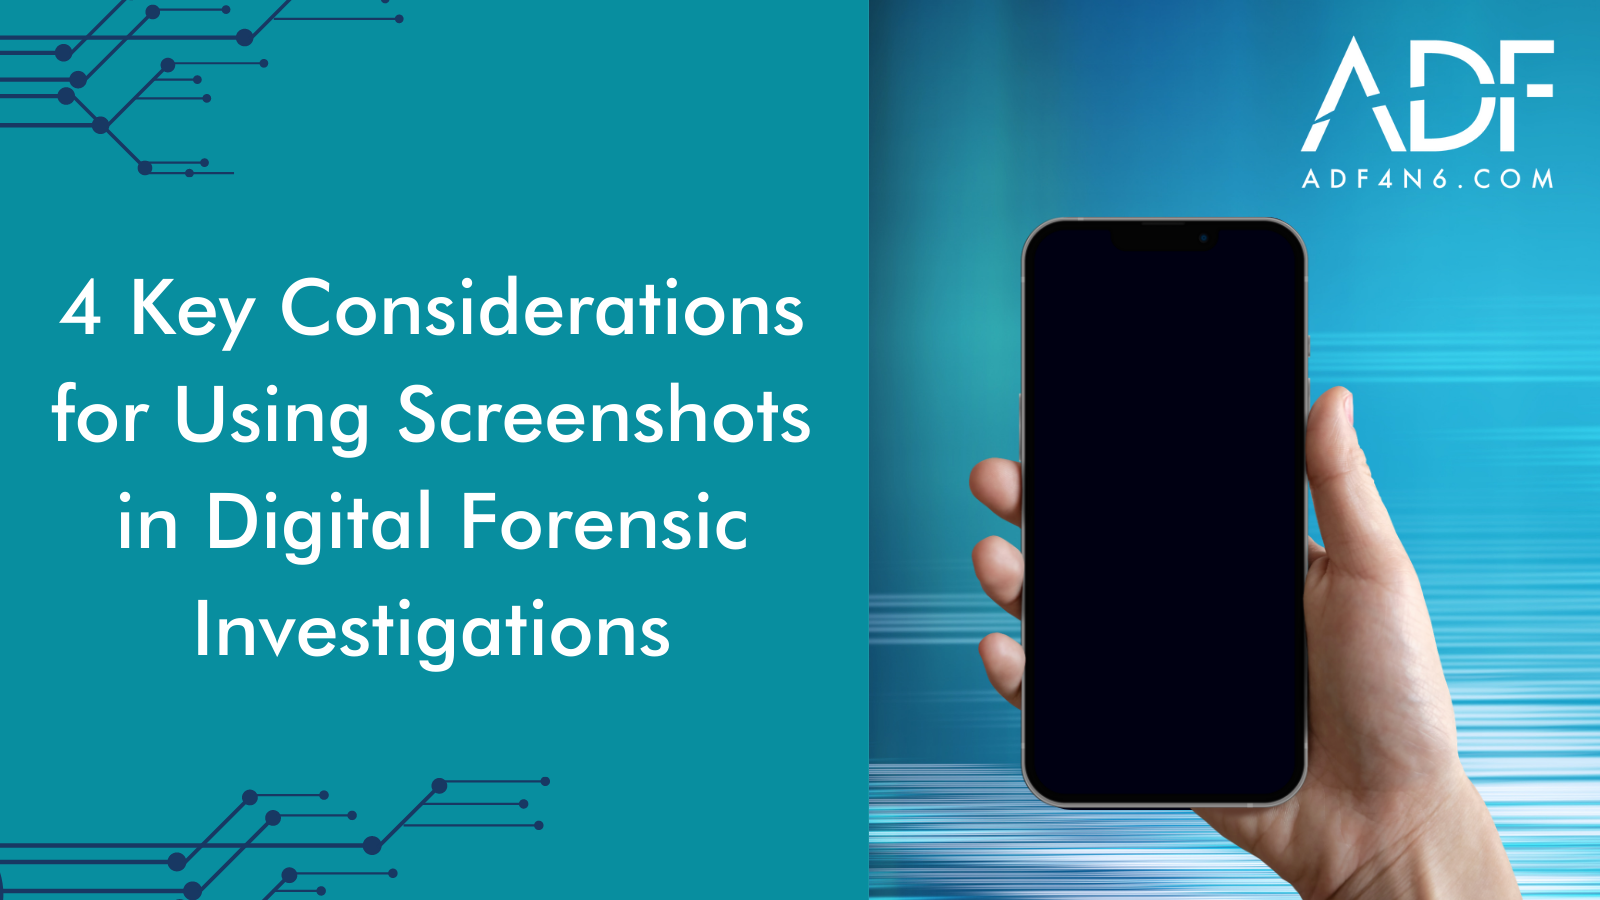 4 Key Considerations for Using Screenshots in Forensic Investigations